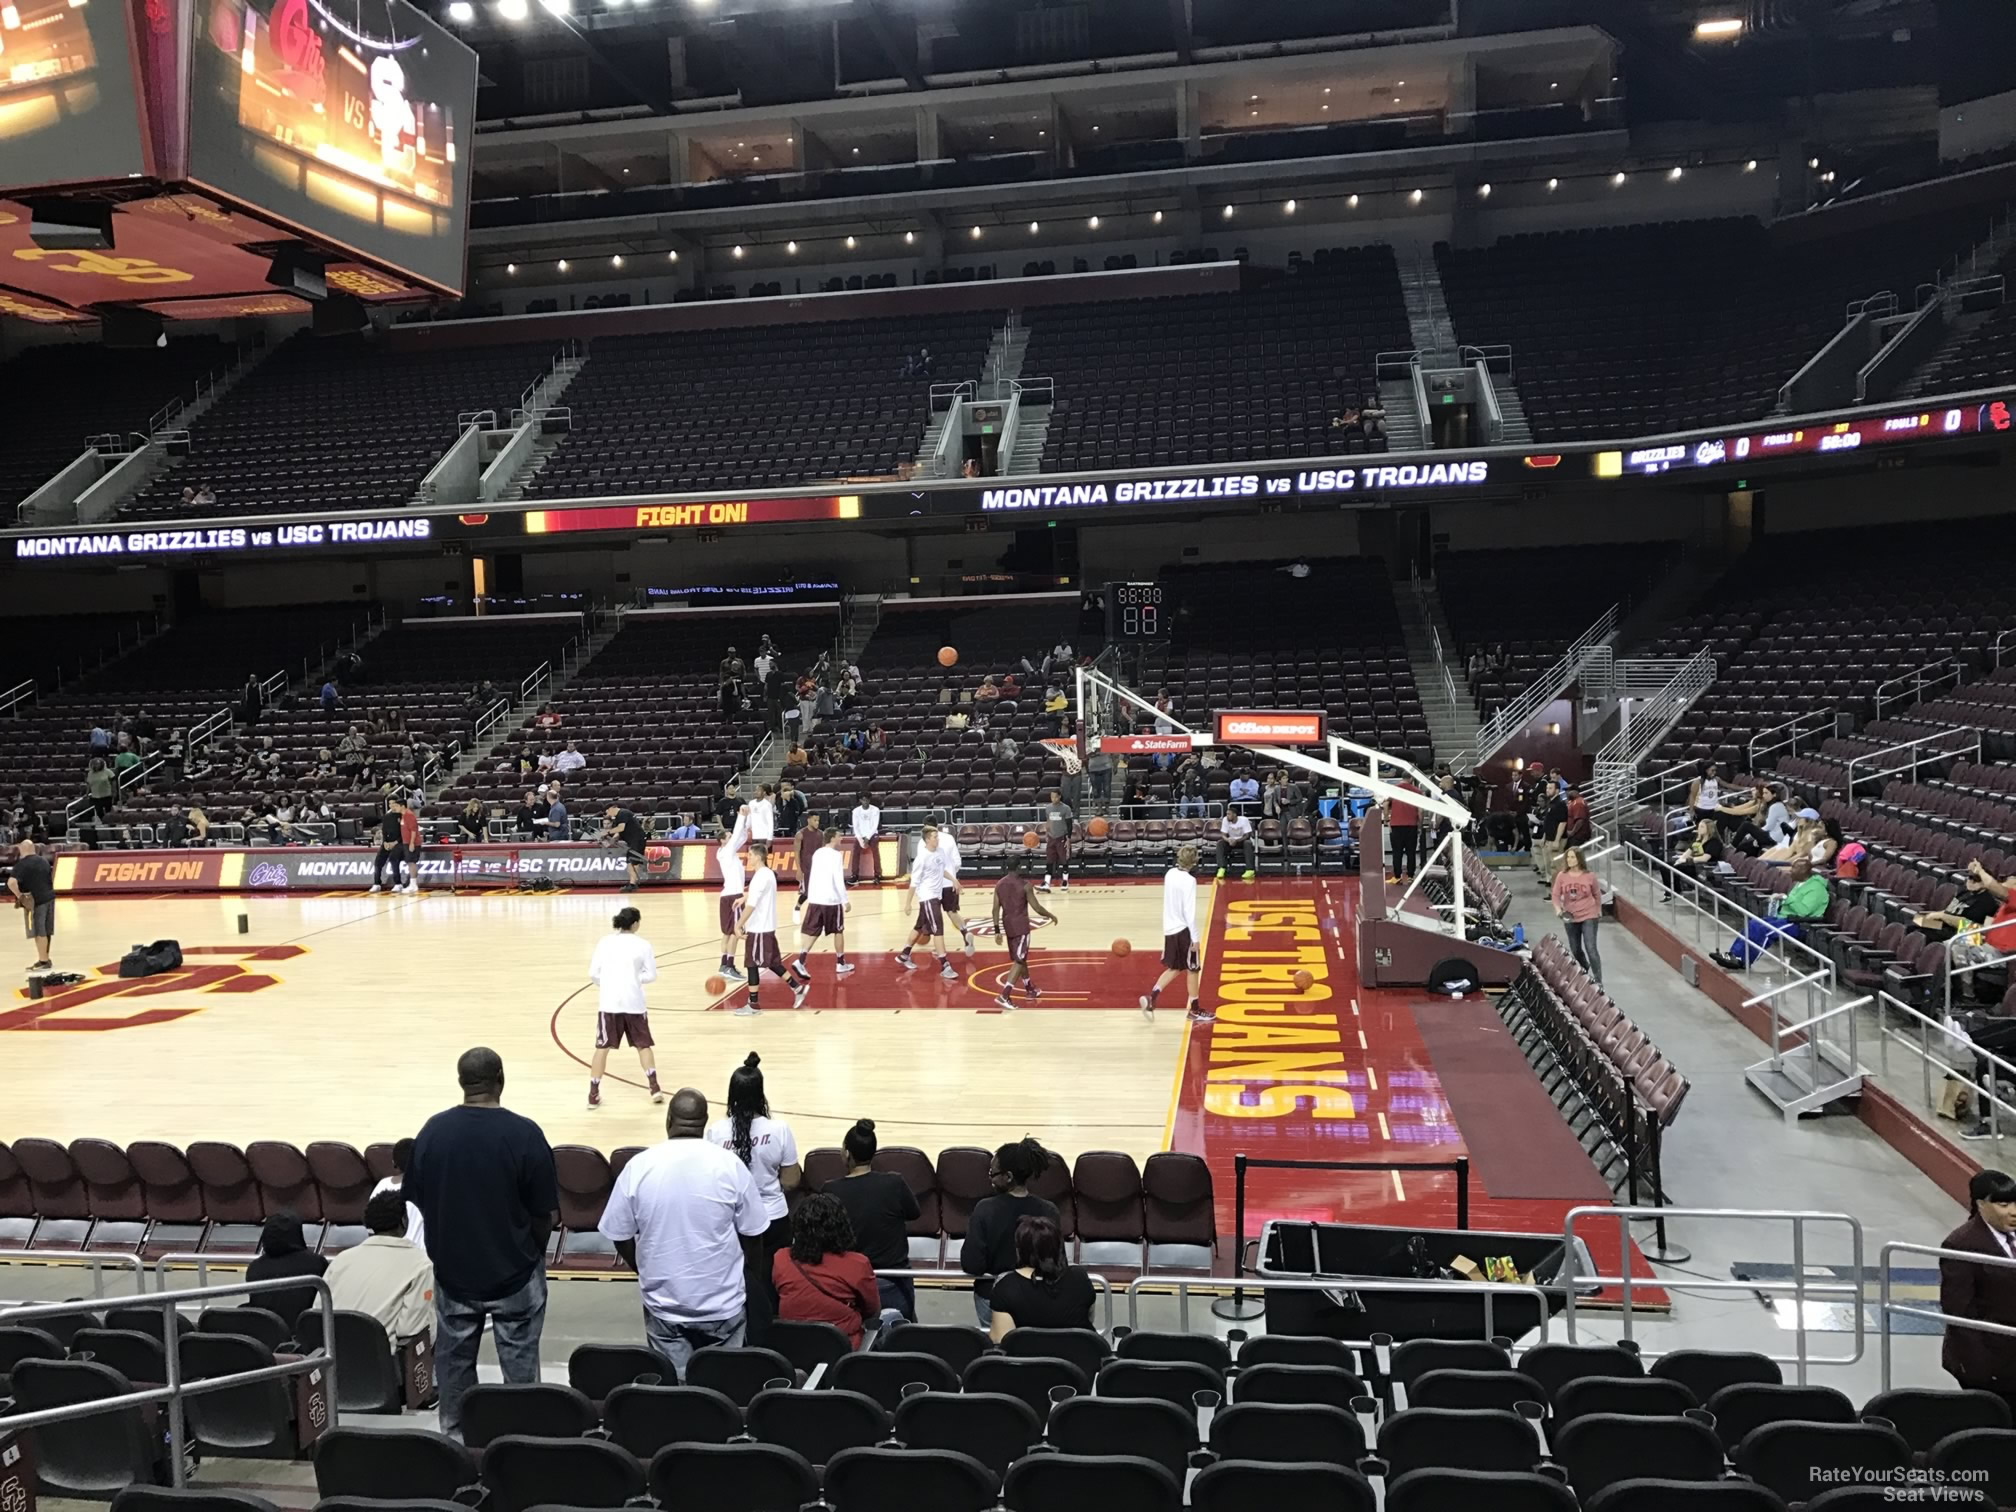 section 106, row 10 seat view  - galen center